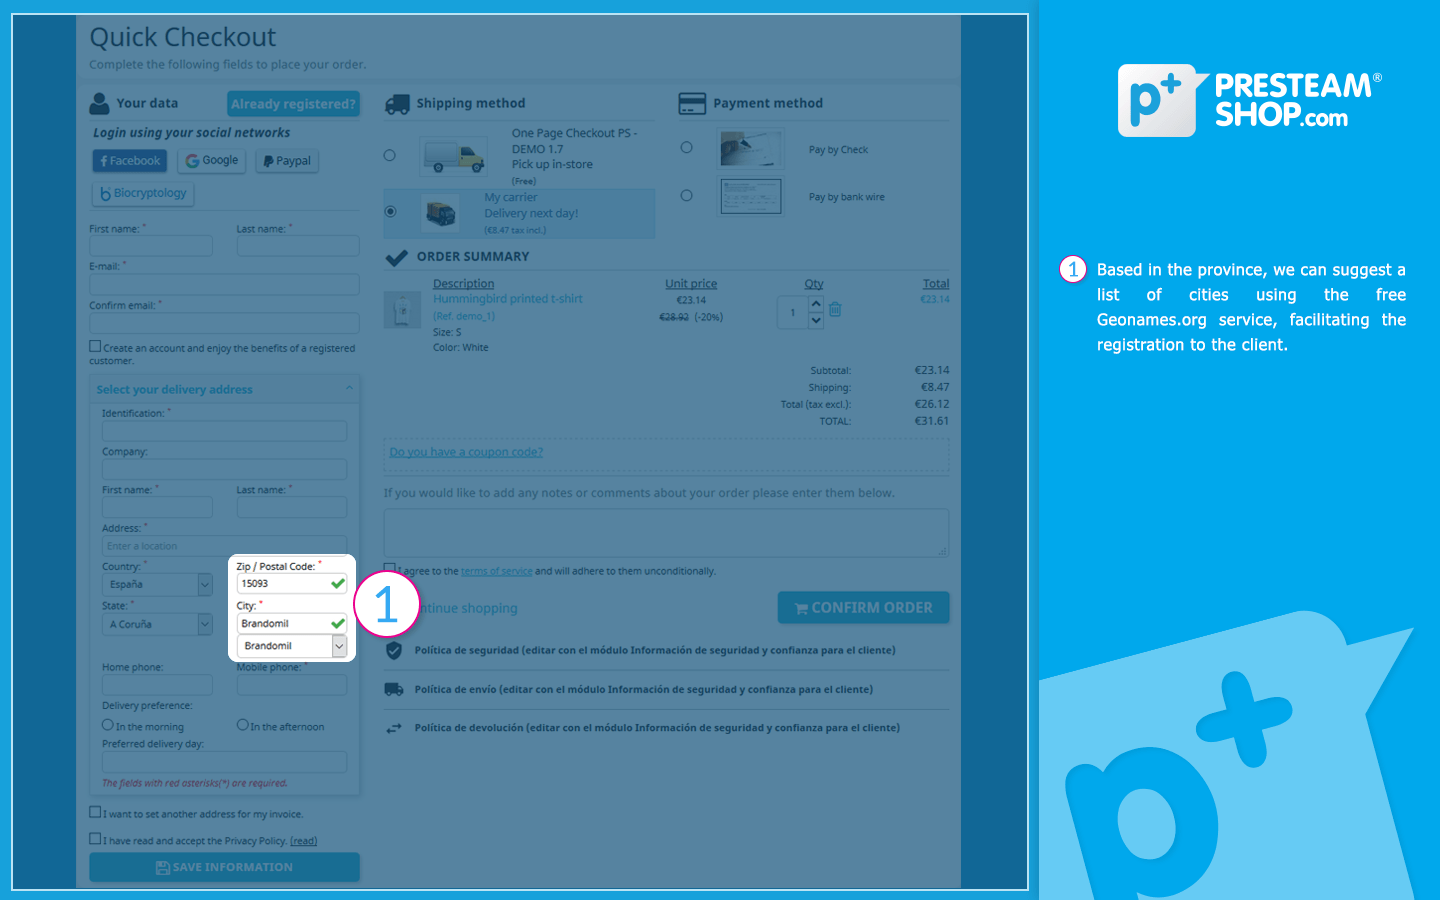 One Page Checkout PS - Improved checkout process